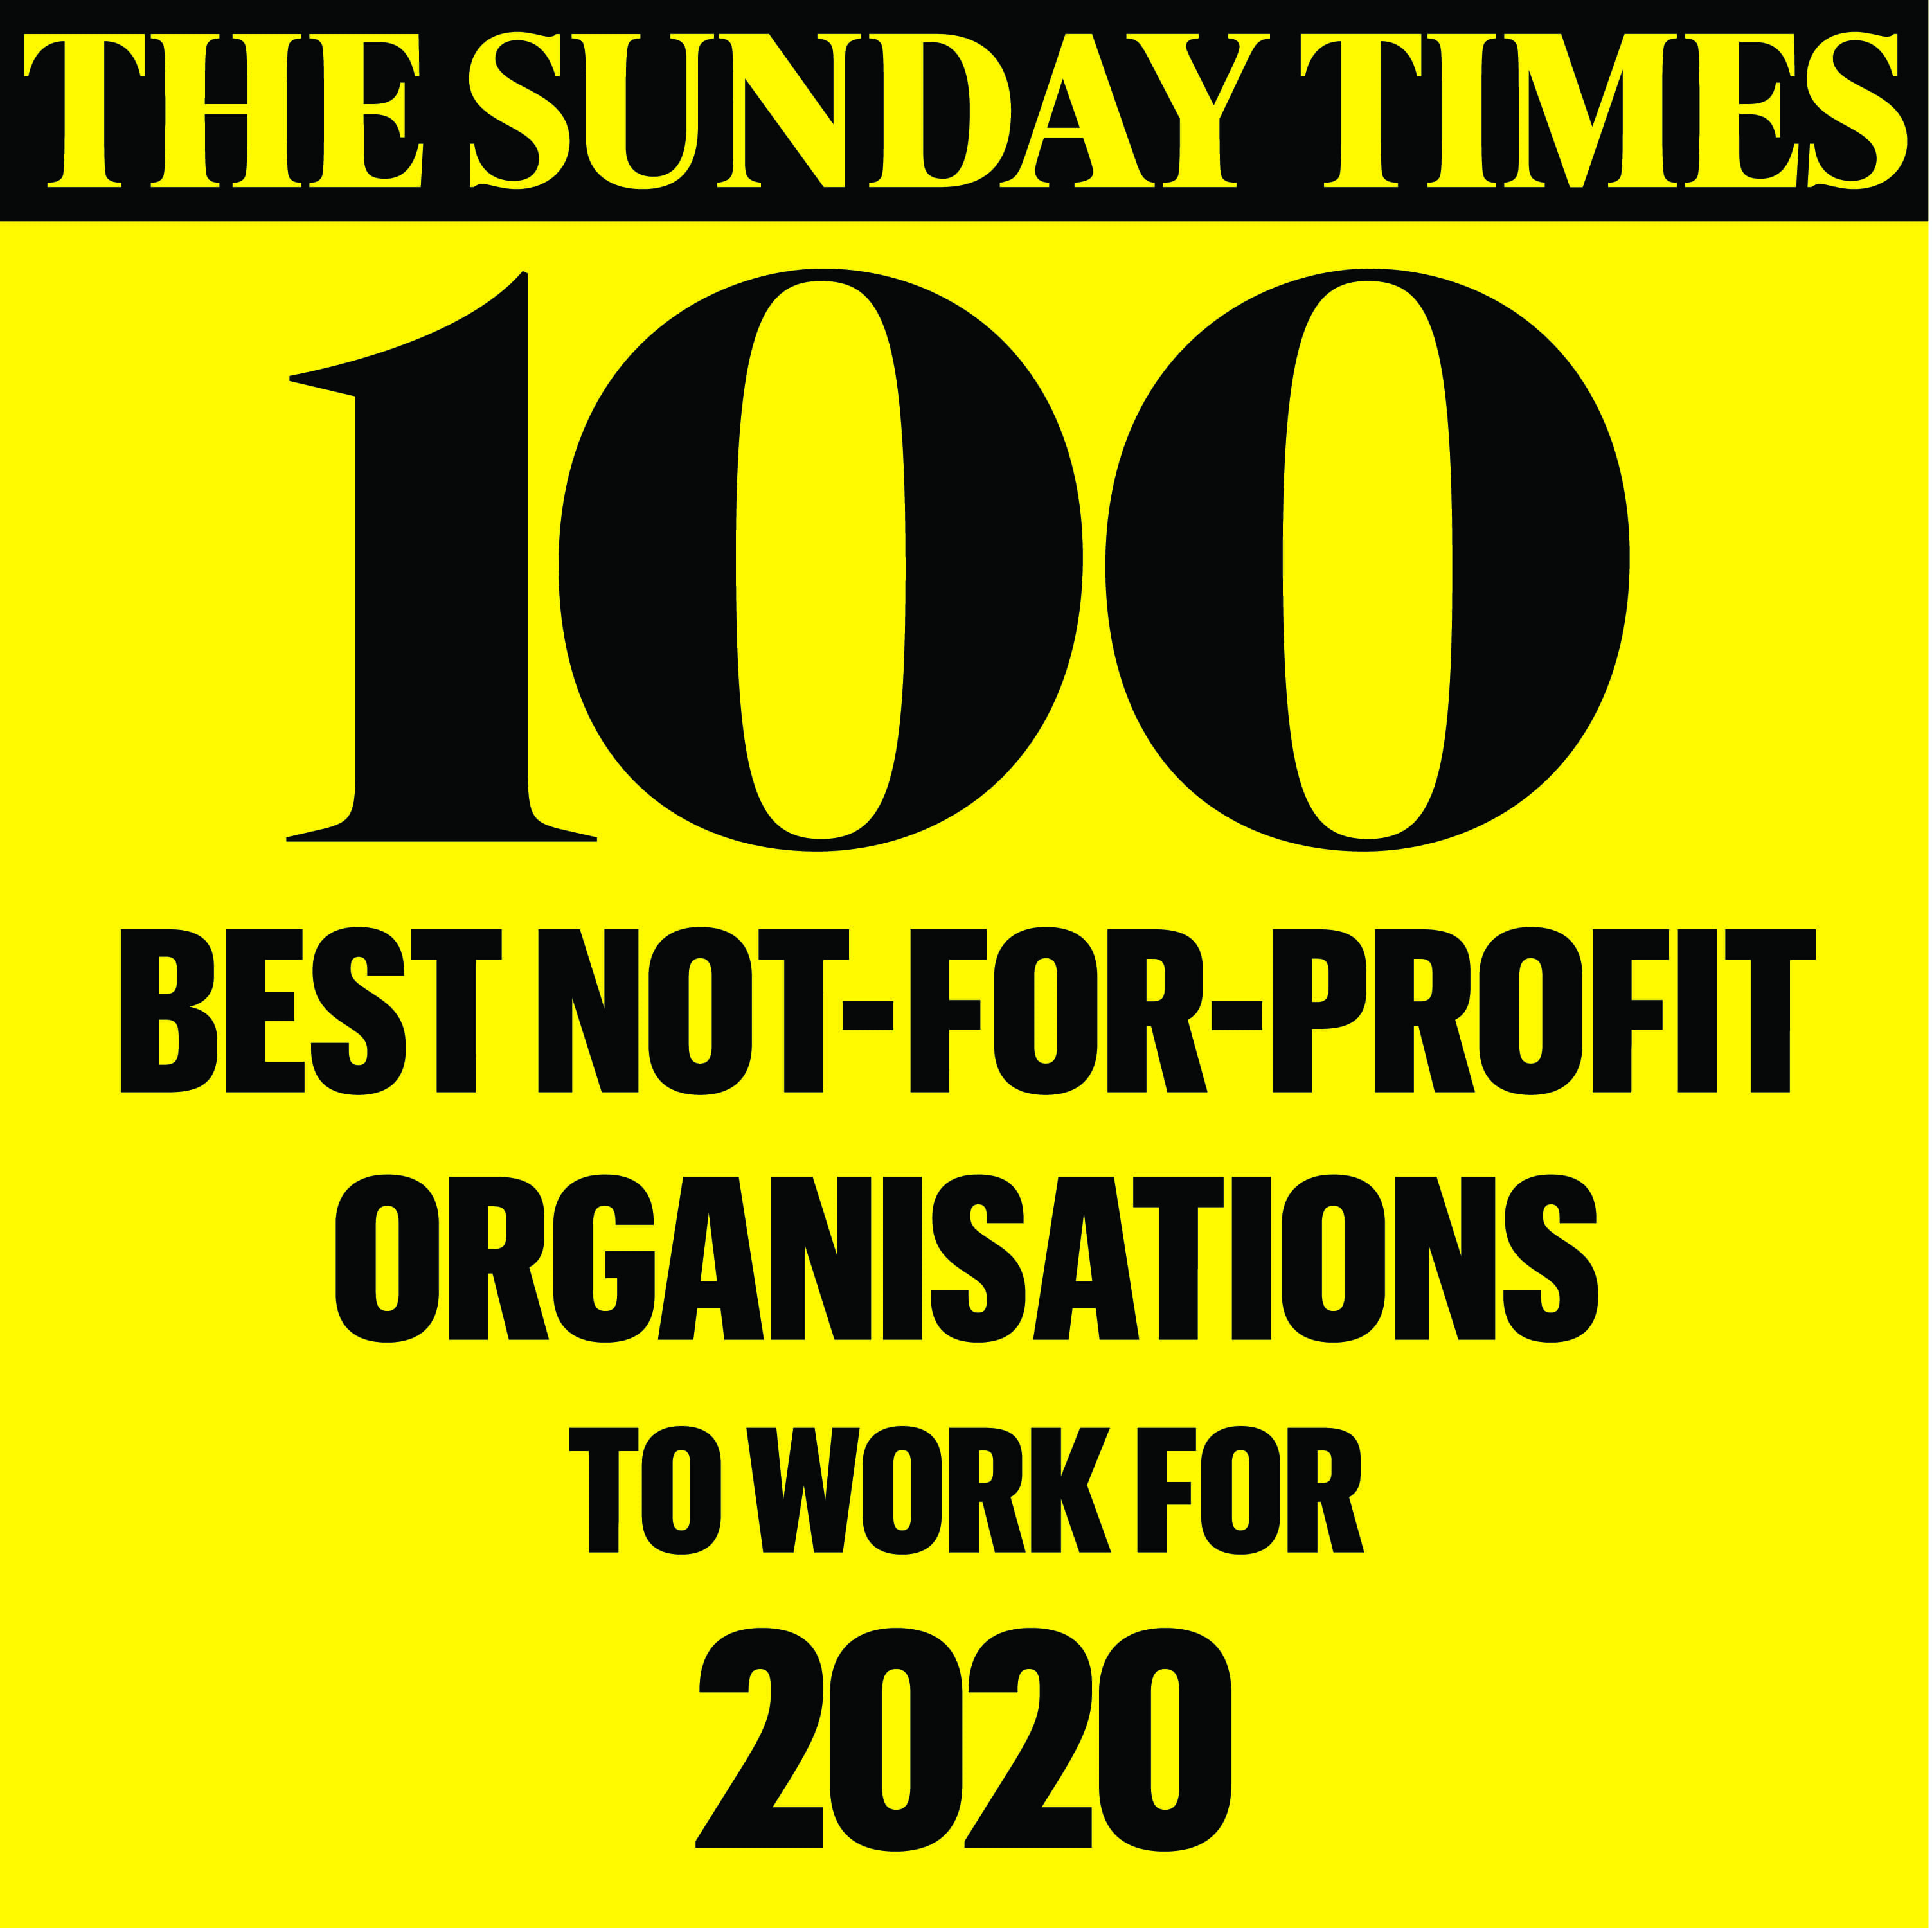 Seafish named in The Sunday Times 100 Best Not for Profit Organisations to work for in 2020